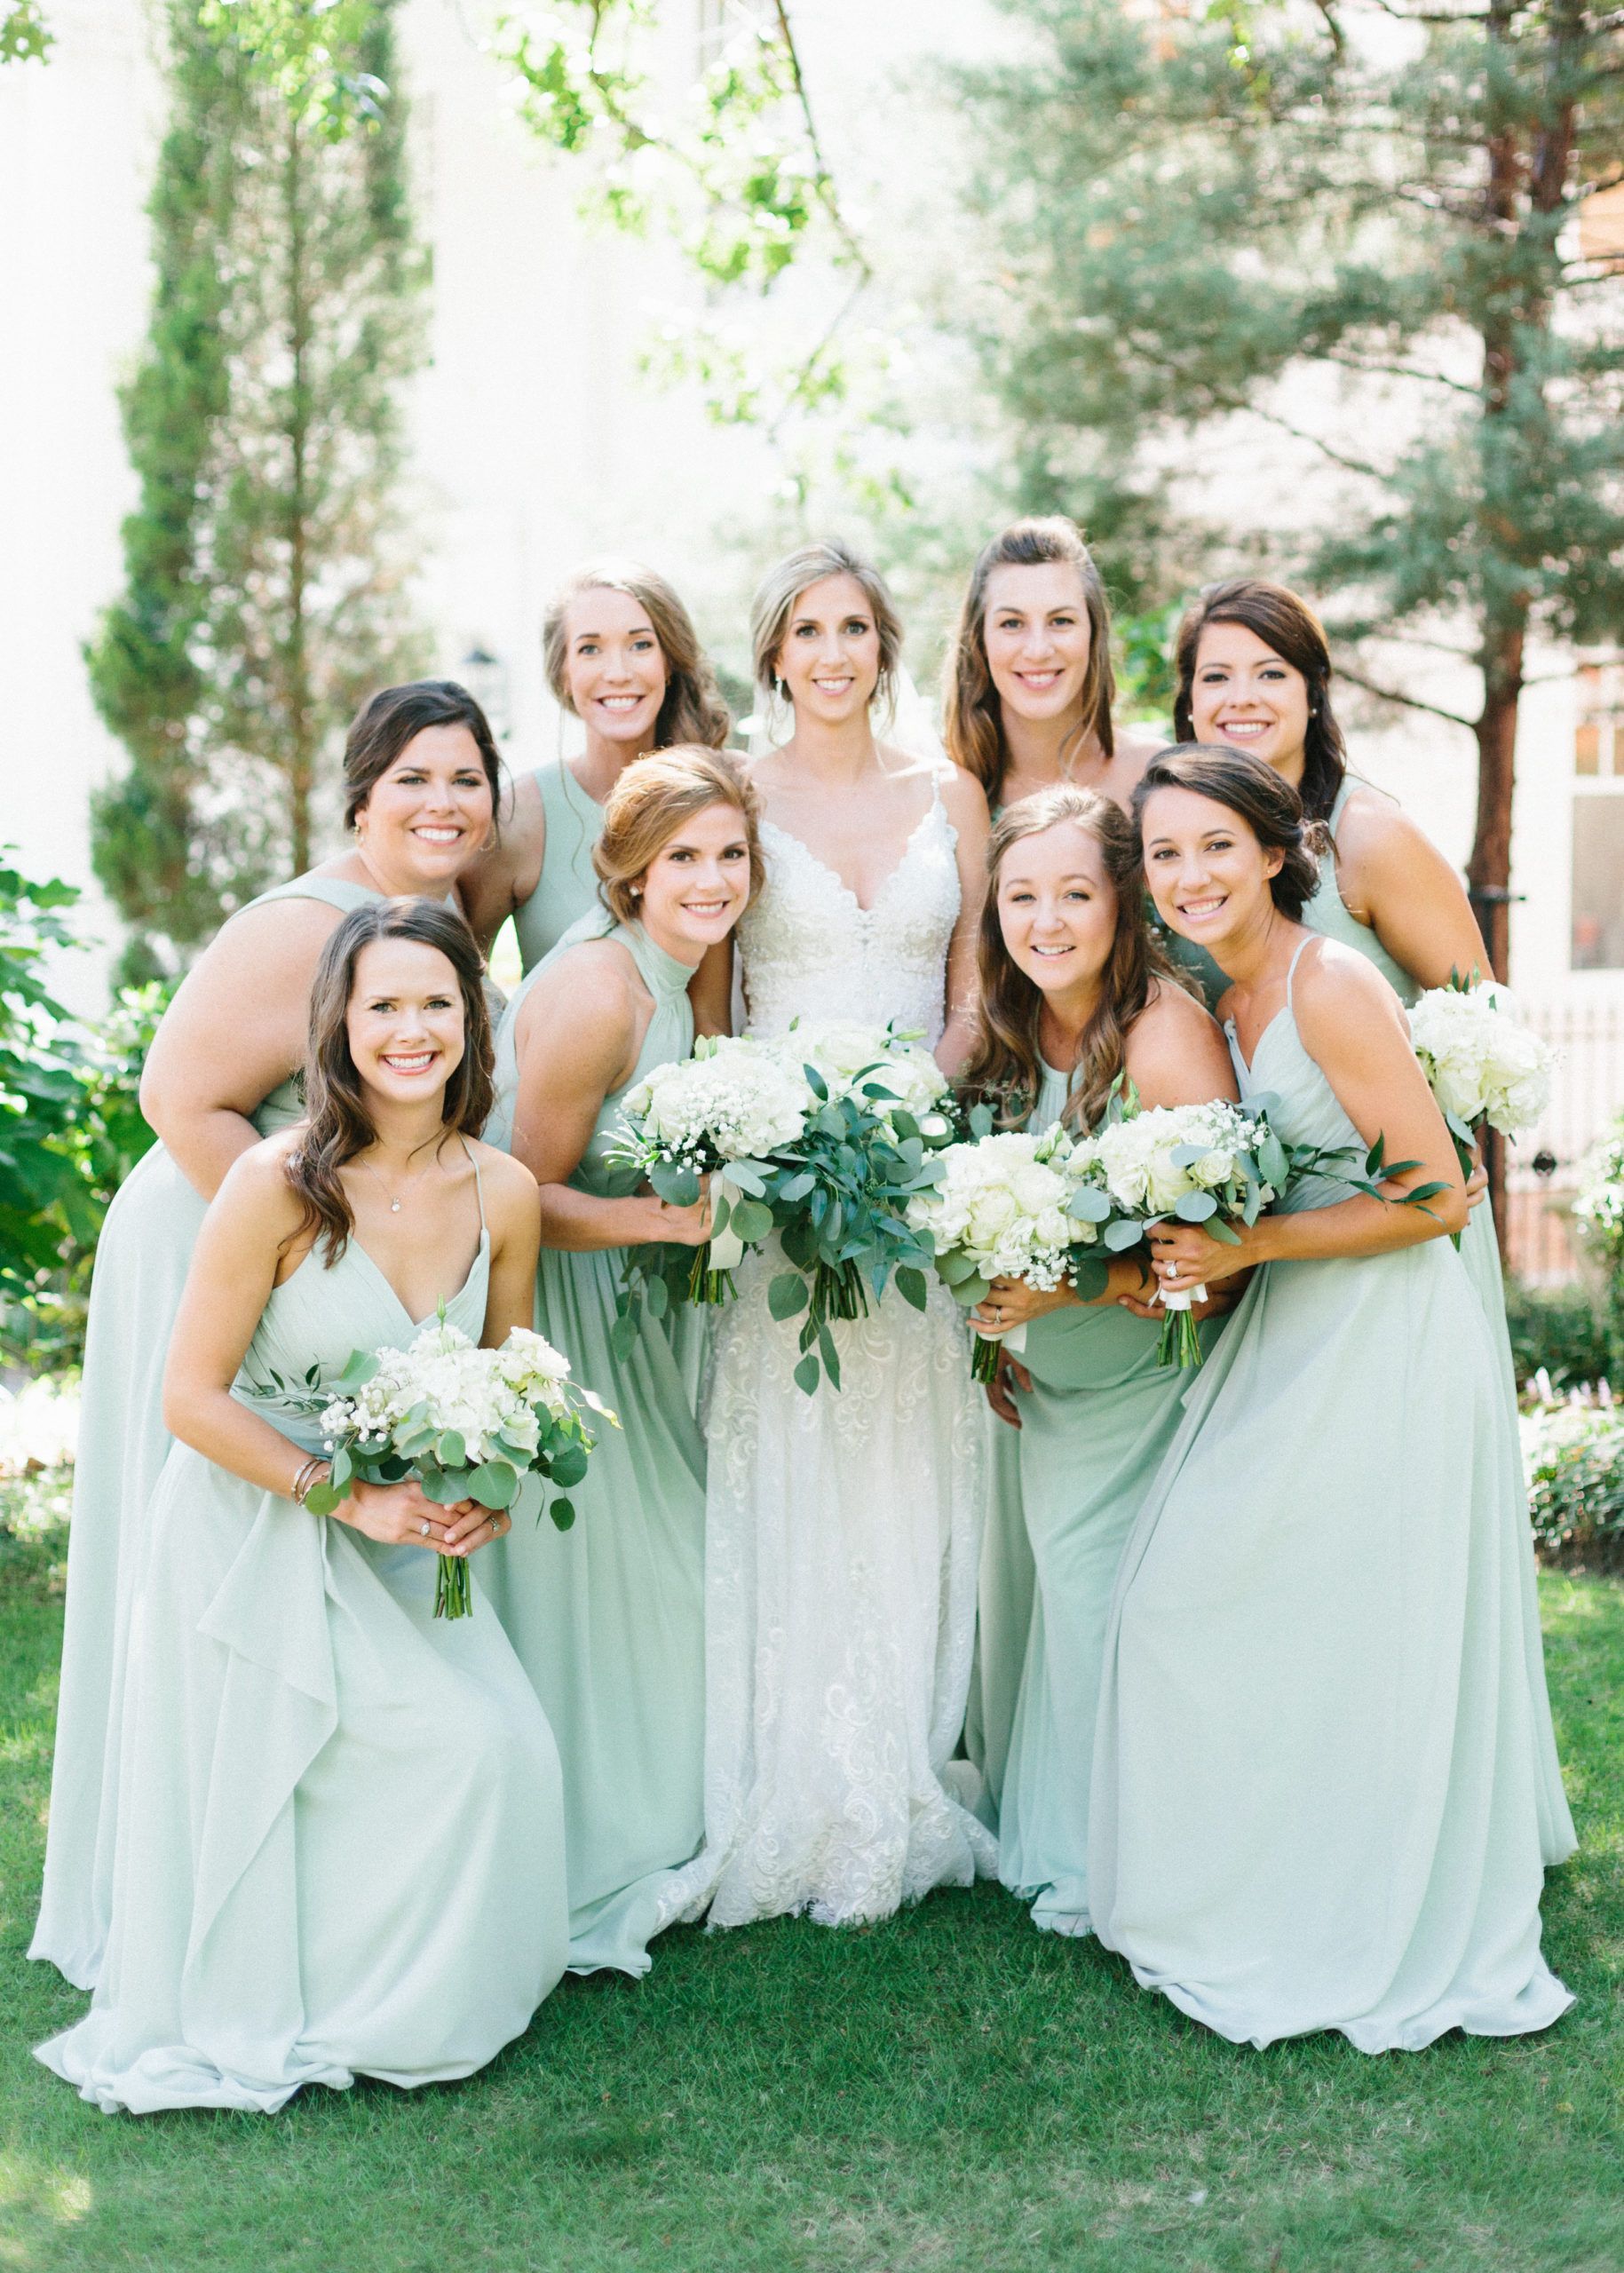 Mint Green Bridesmaid Dress
  Outfit Ideas